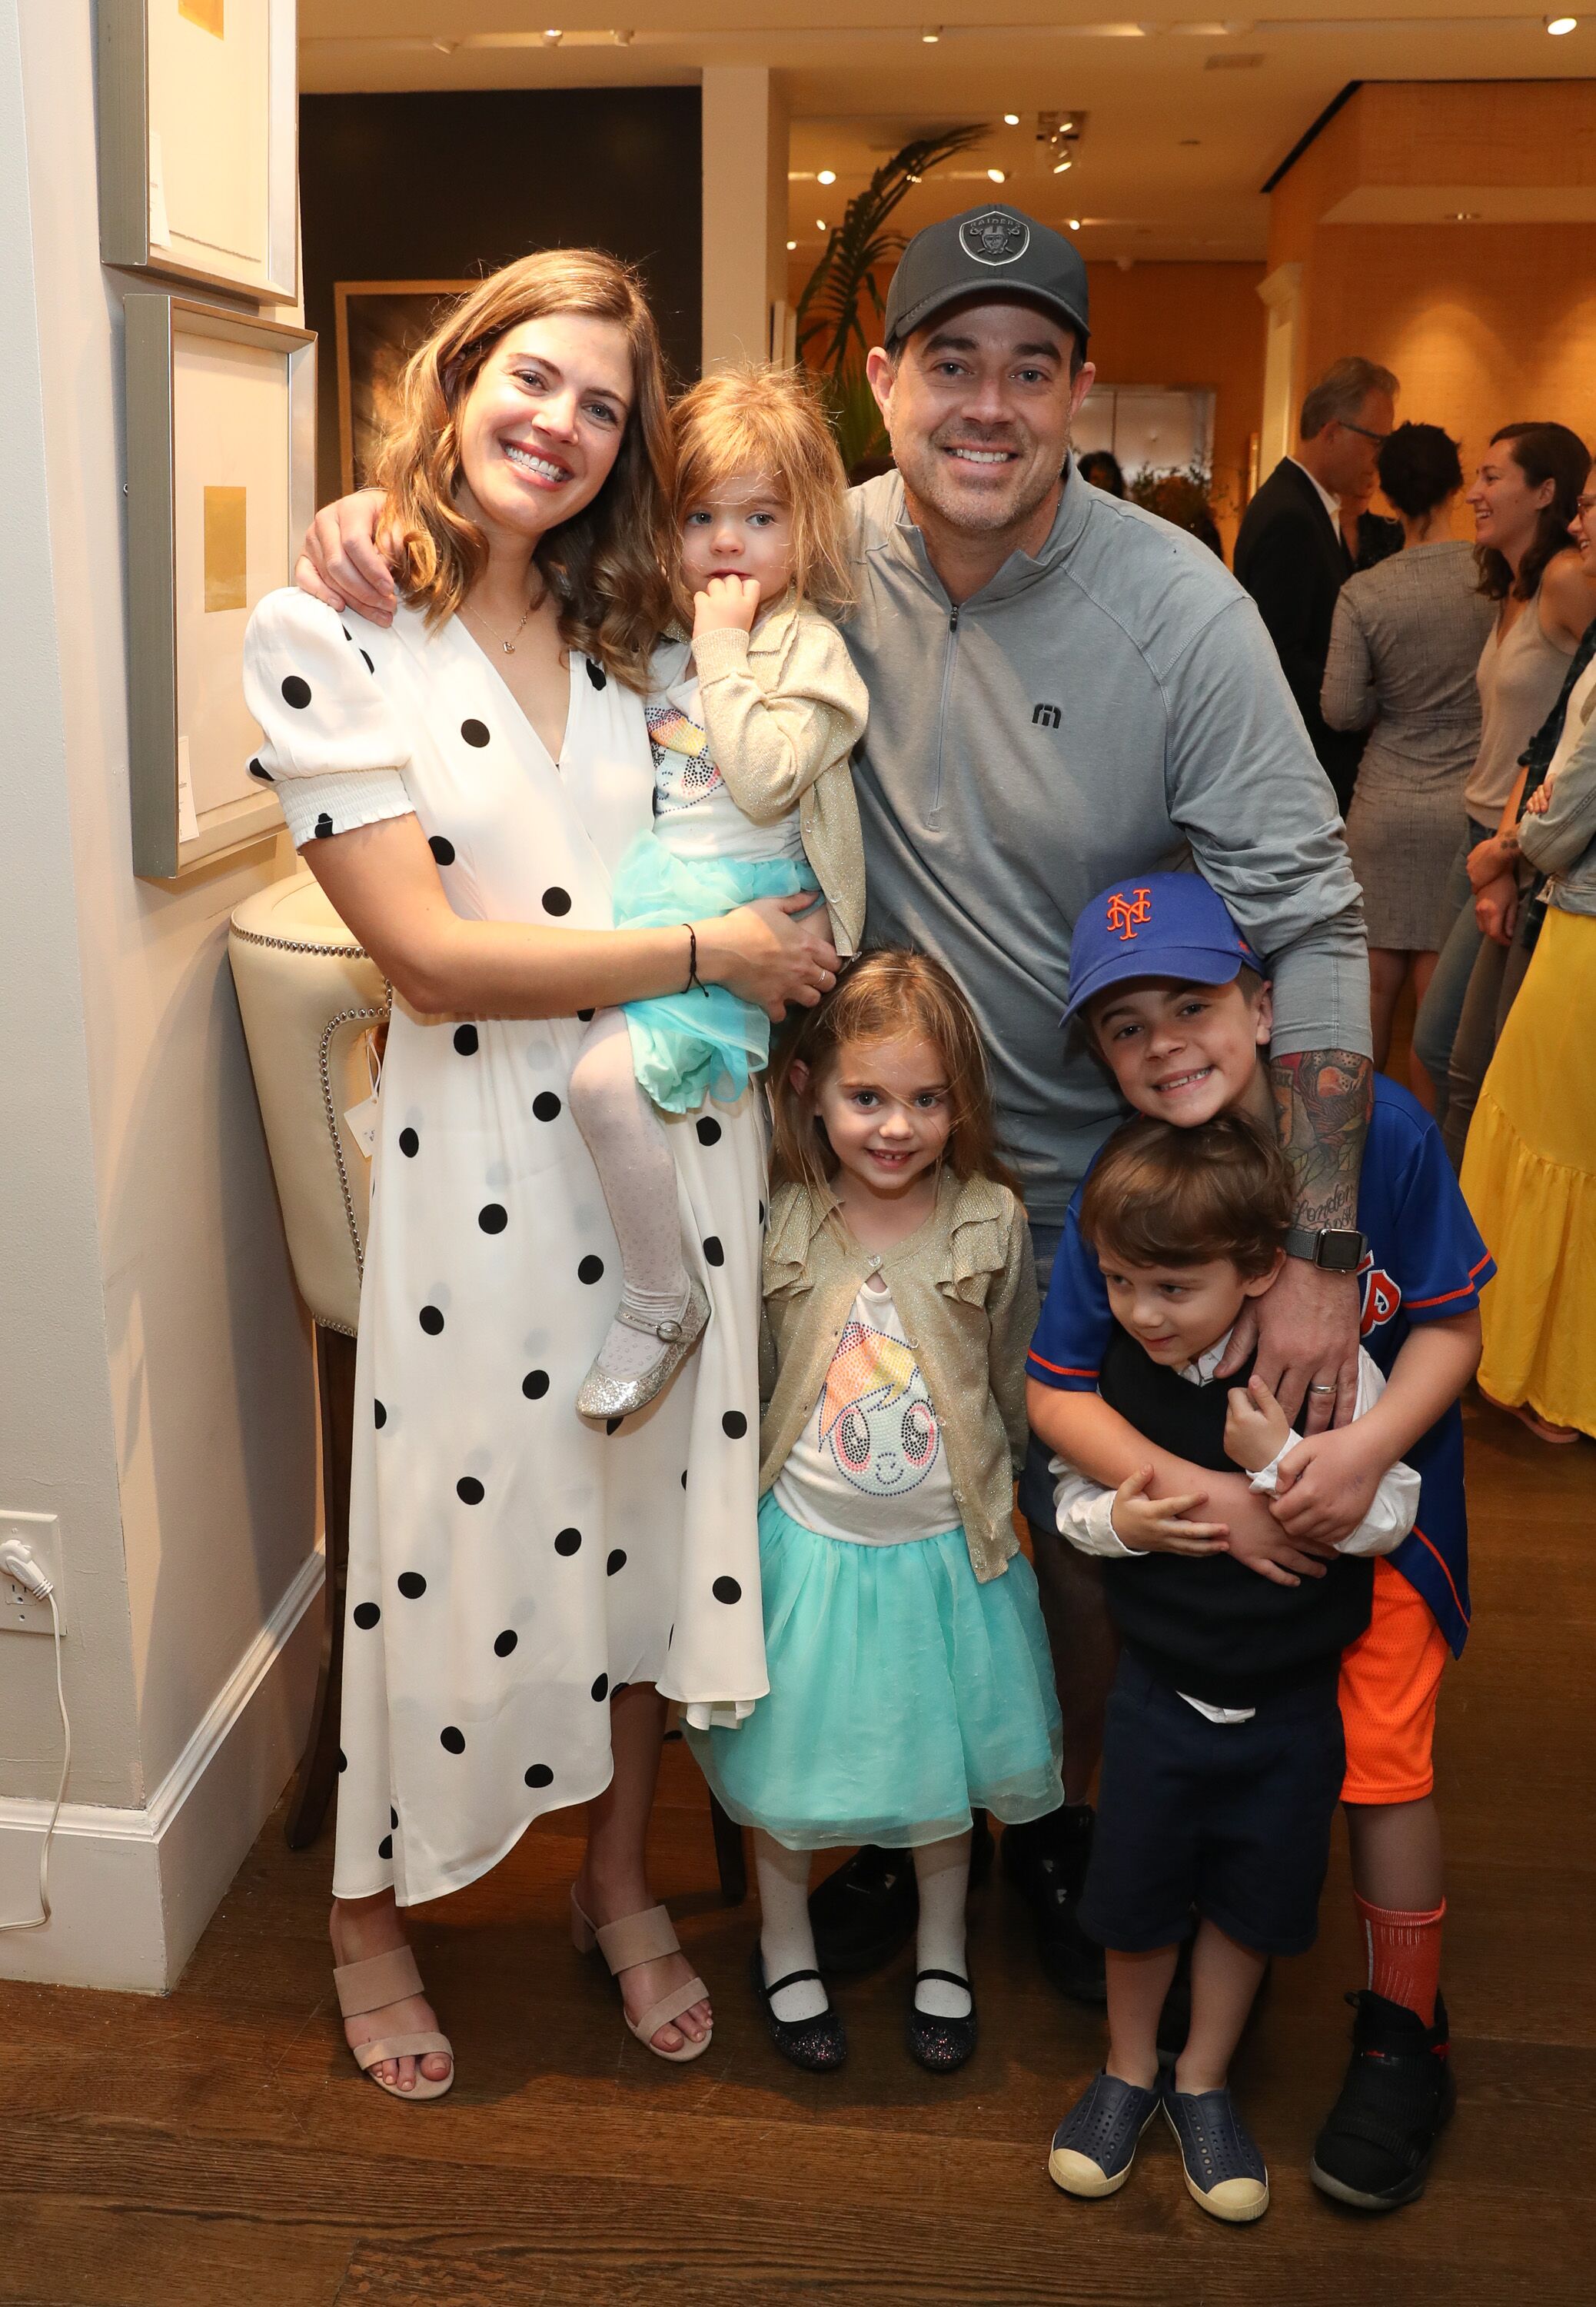 Carson and Siri Daly attend the "Siriously Delicious" by Siri Daly book launch with their children | Source: Getty Images